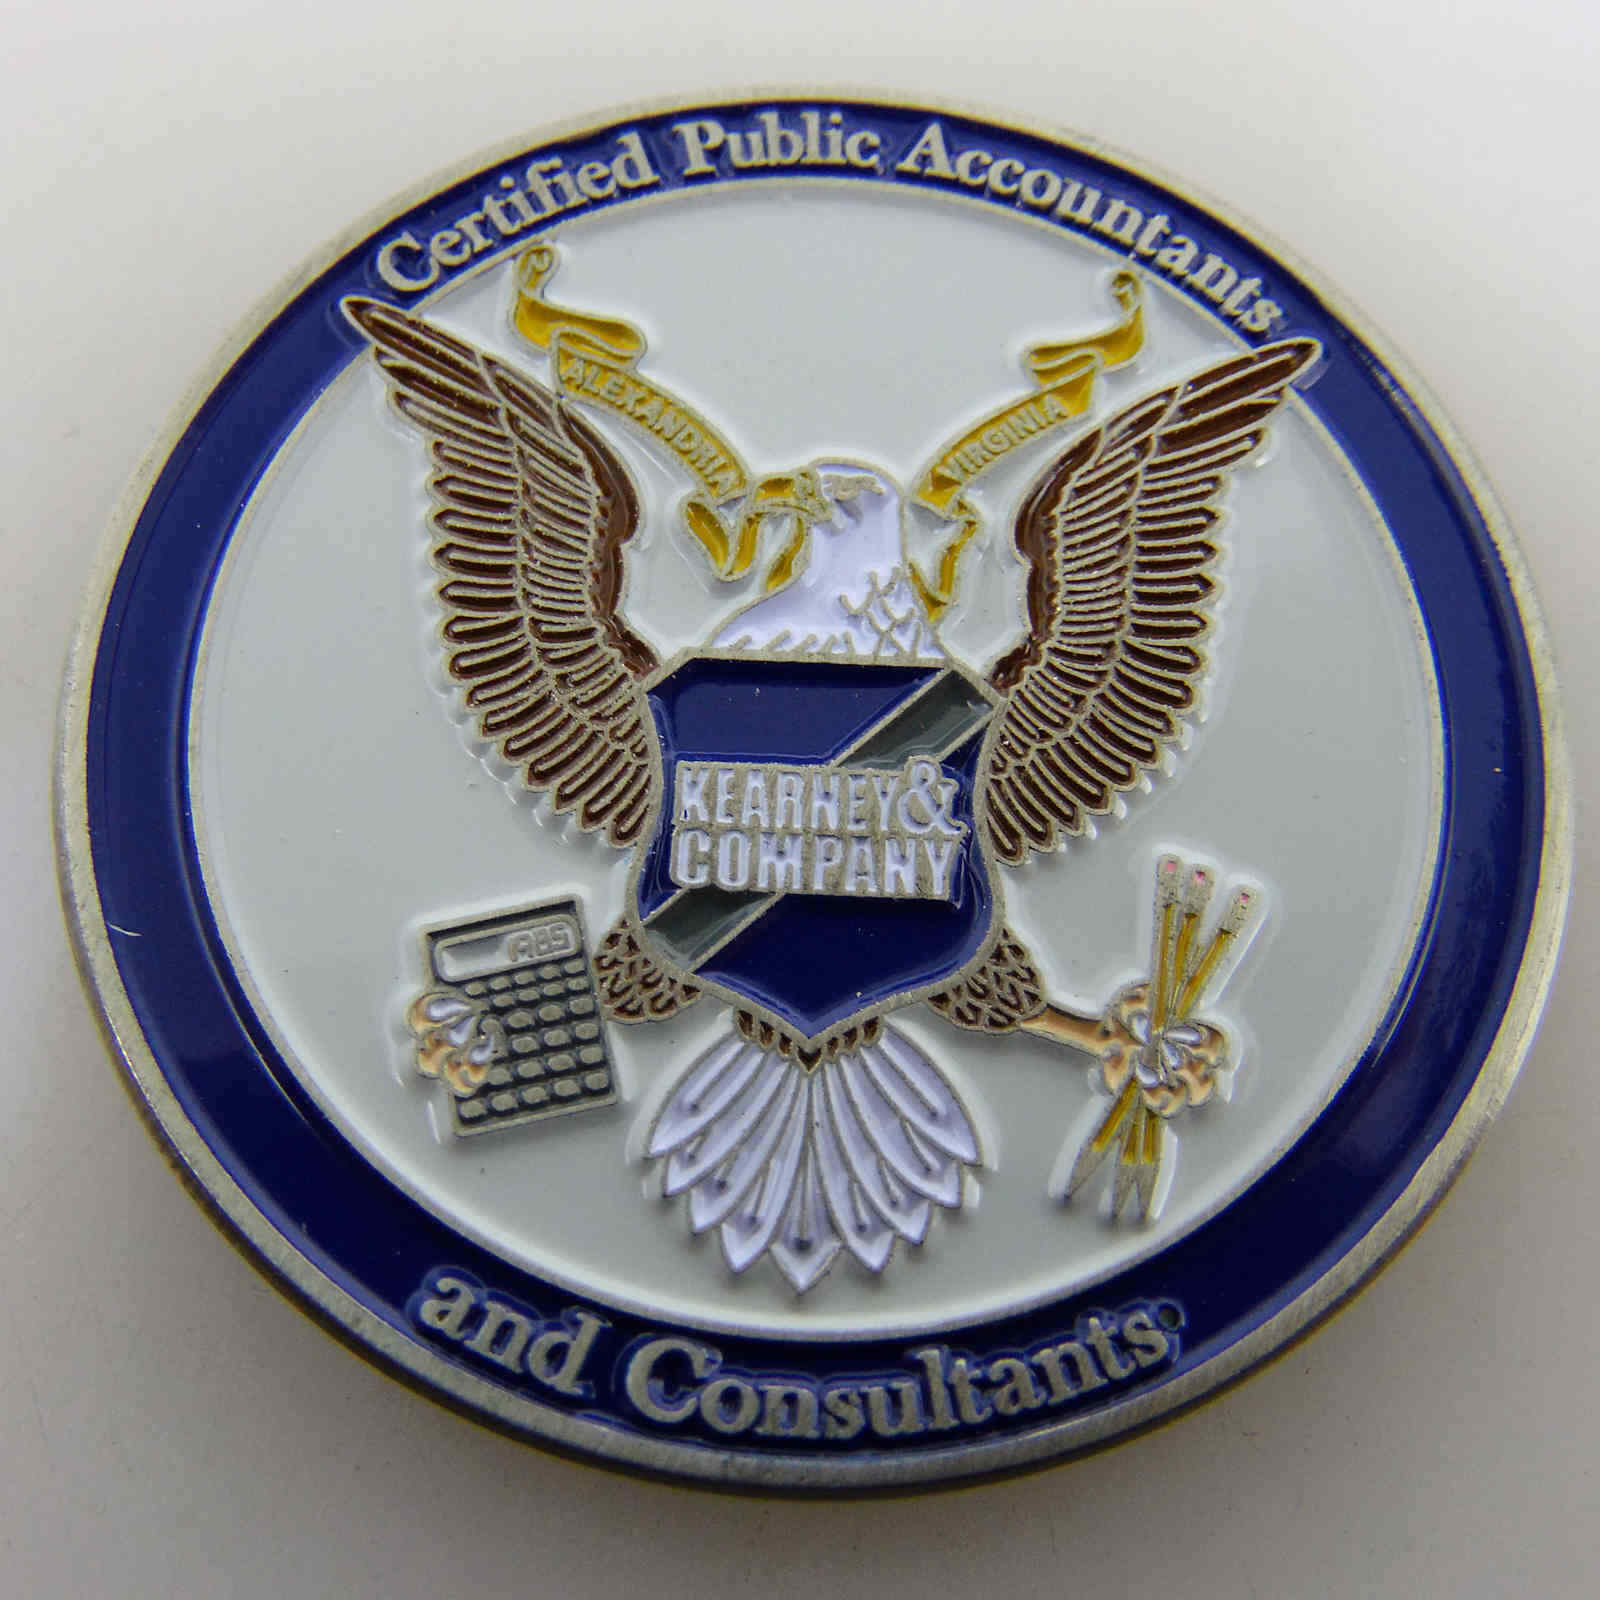 CERTIFIED PUBLIC ACCOUNTANTS AND CONSULTANTS CHALLENGE COIN